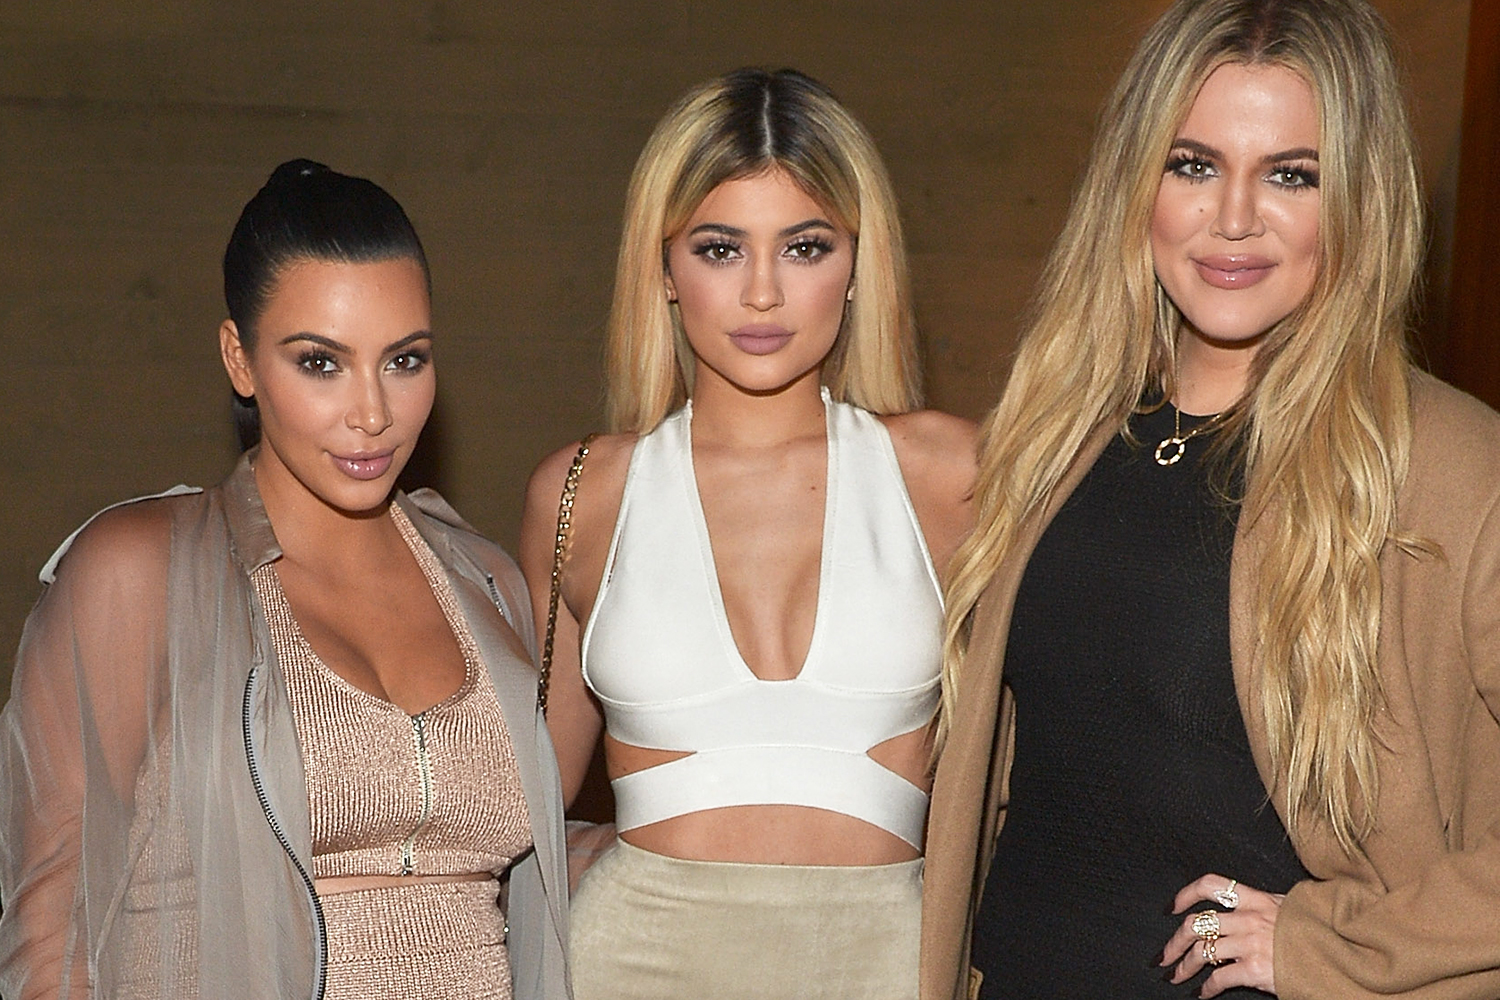 Funniest Twitter Reactions From People Trying To Keep Up With The Kardashian Pregnancies